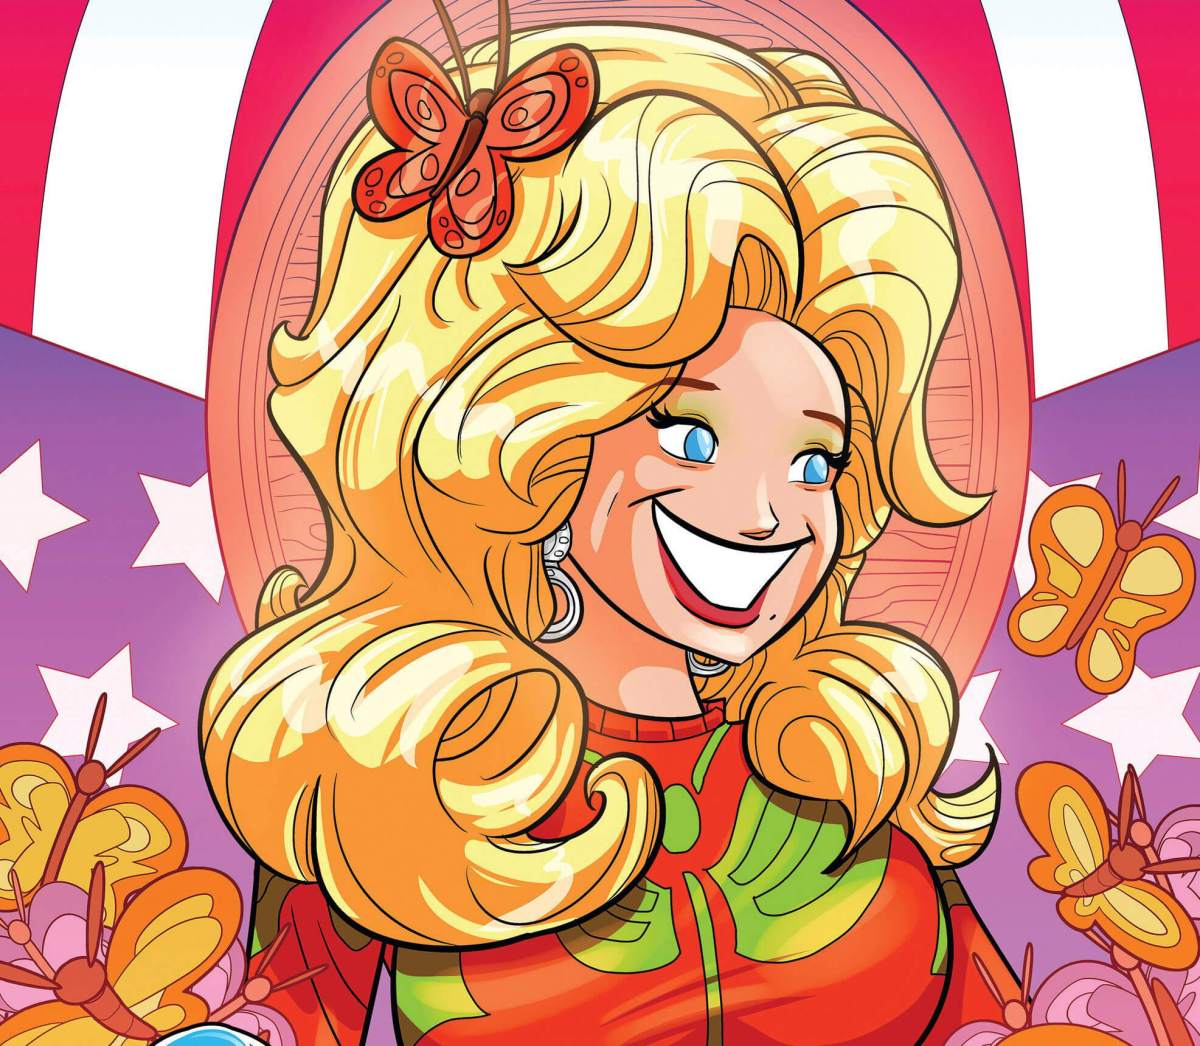 An image shows a cover page of a TidalWave Comics’ comic book based on life of singer Dolly Parton, with planned release date March 31, 2021